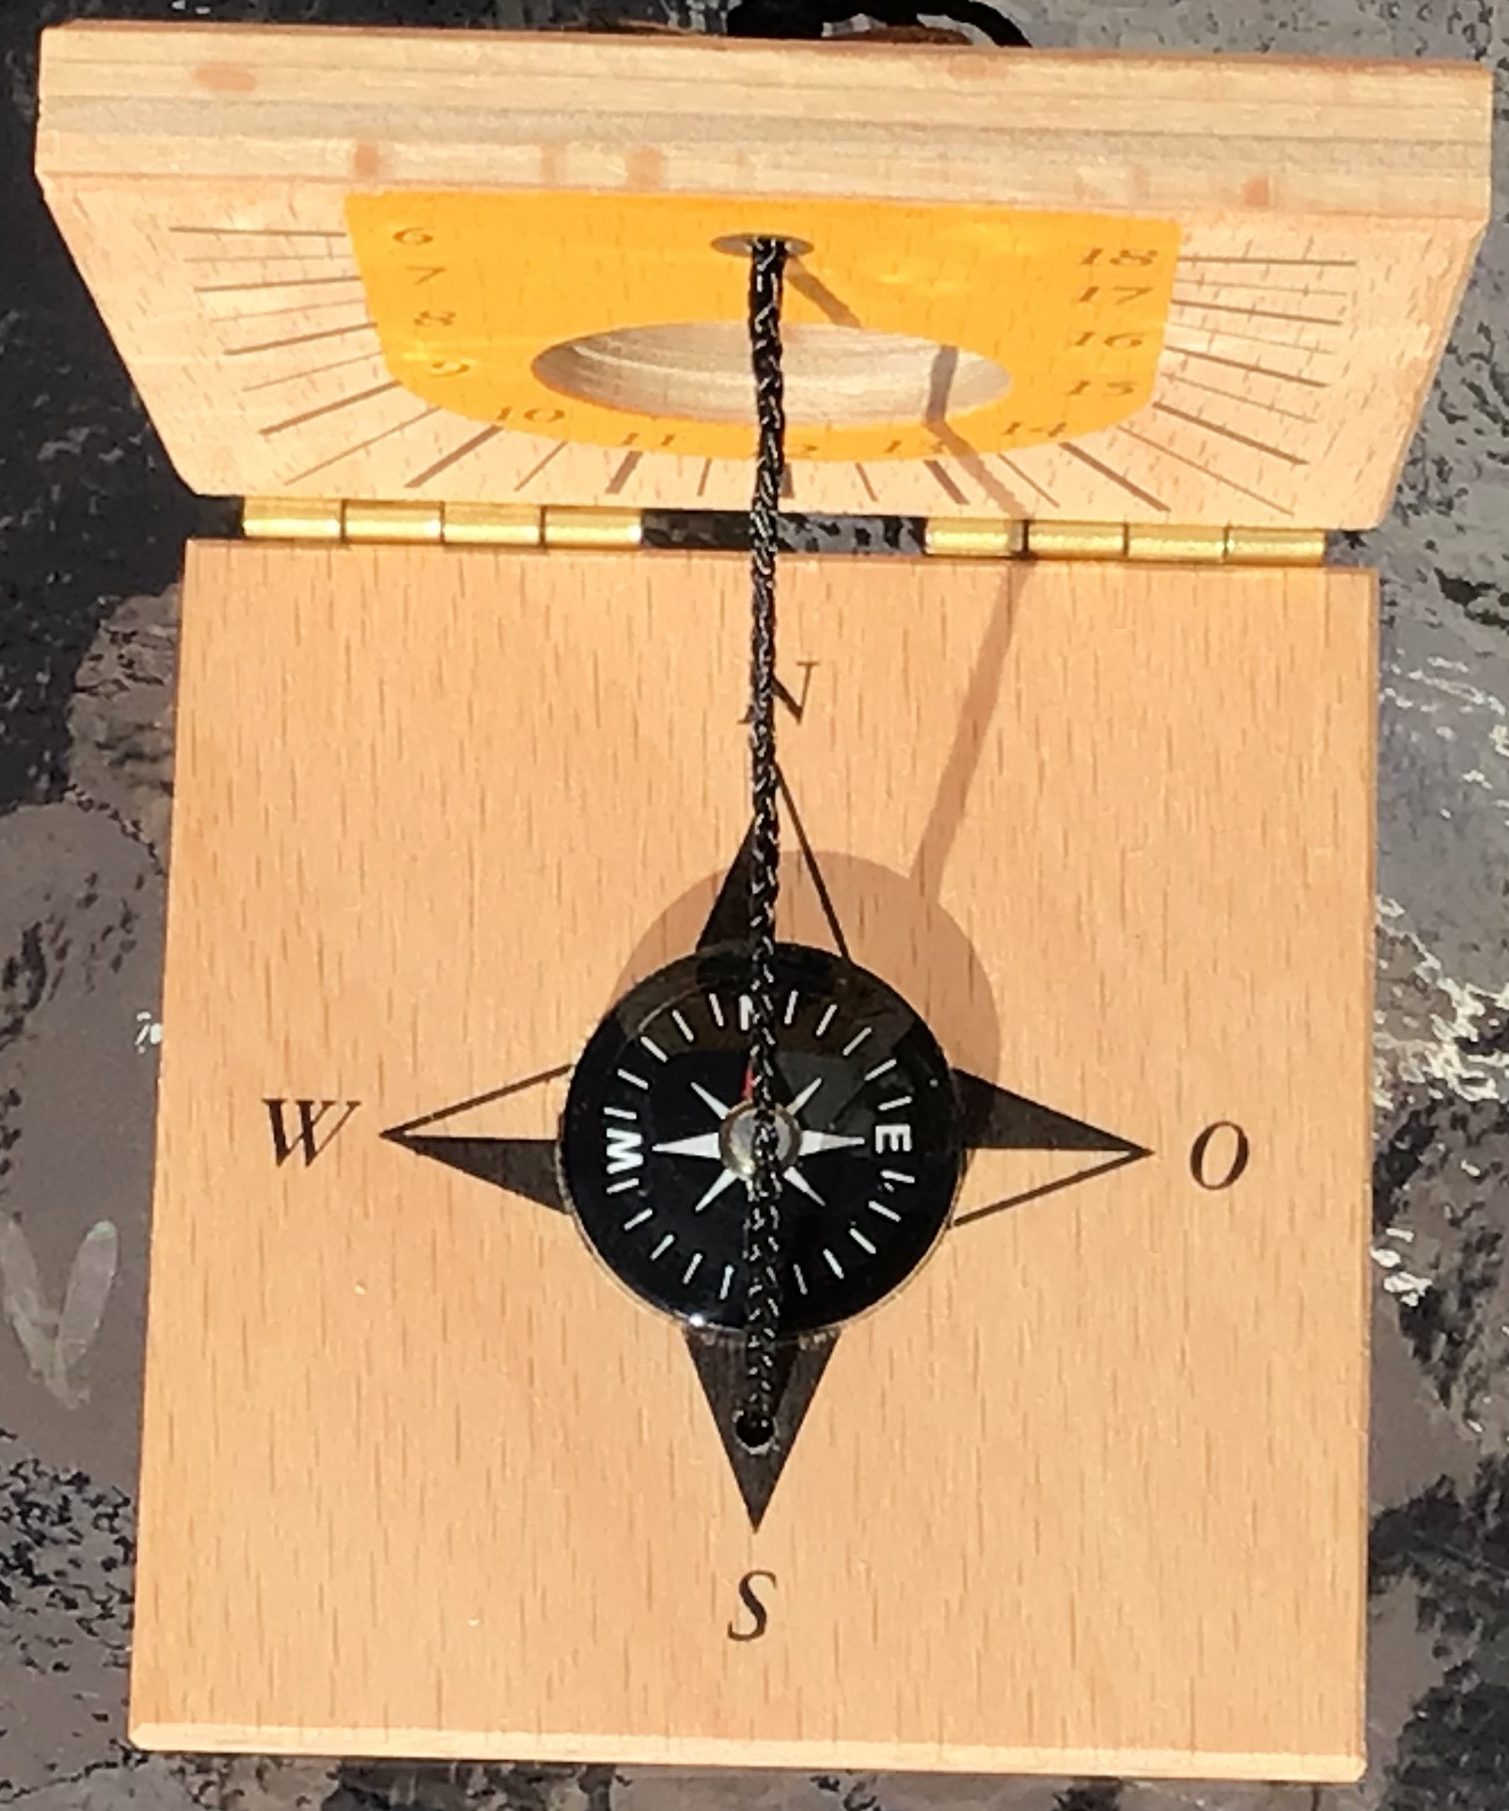 Modern sun dial with string and compass